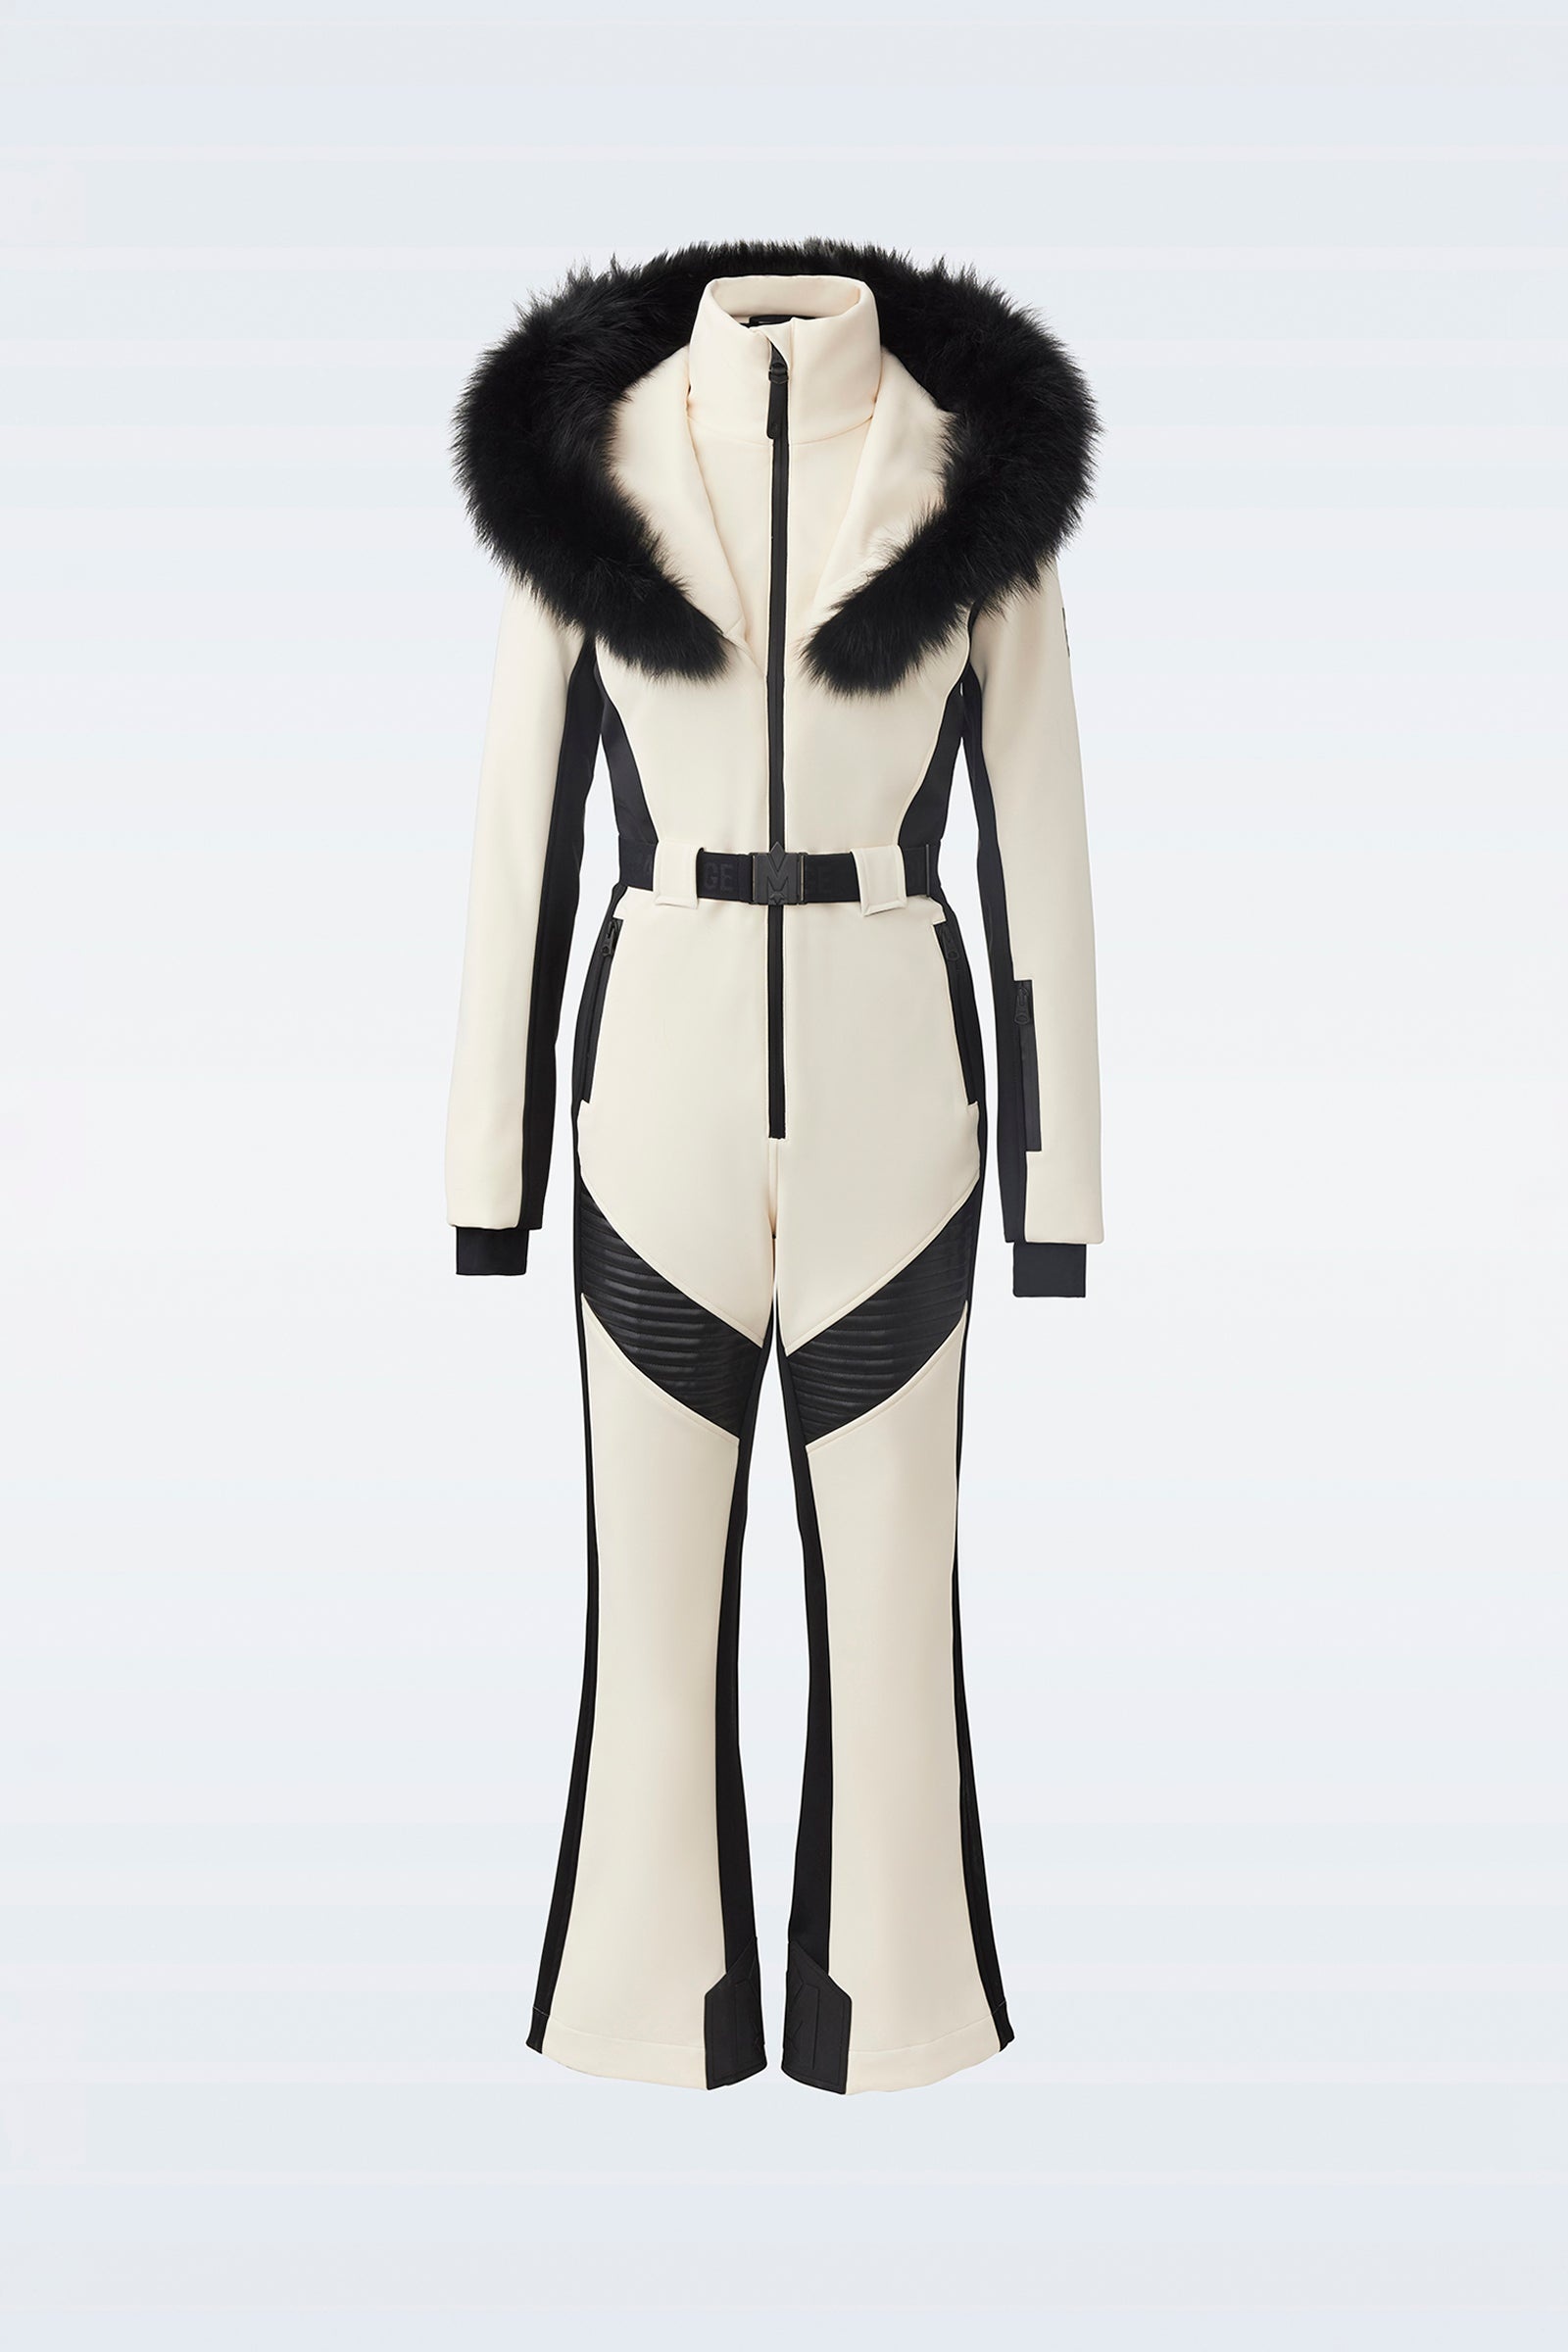 Shawna, Techno fleece ski suit with articulated sleeves and knees